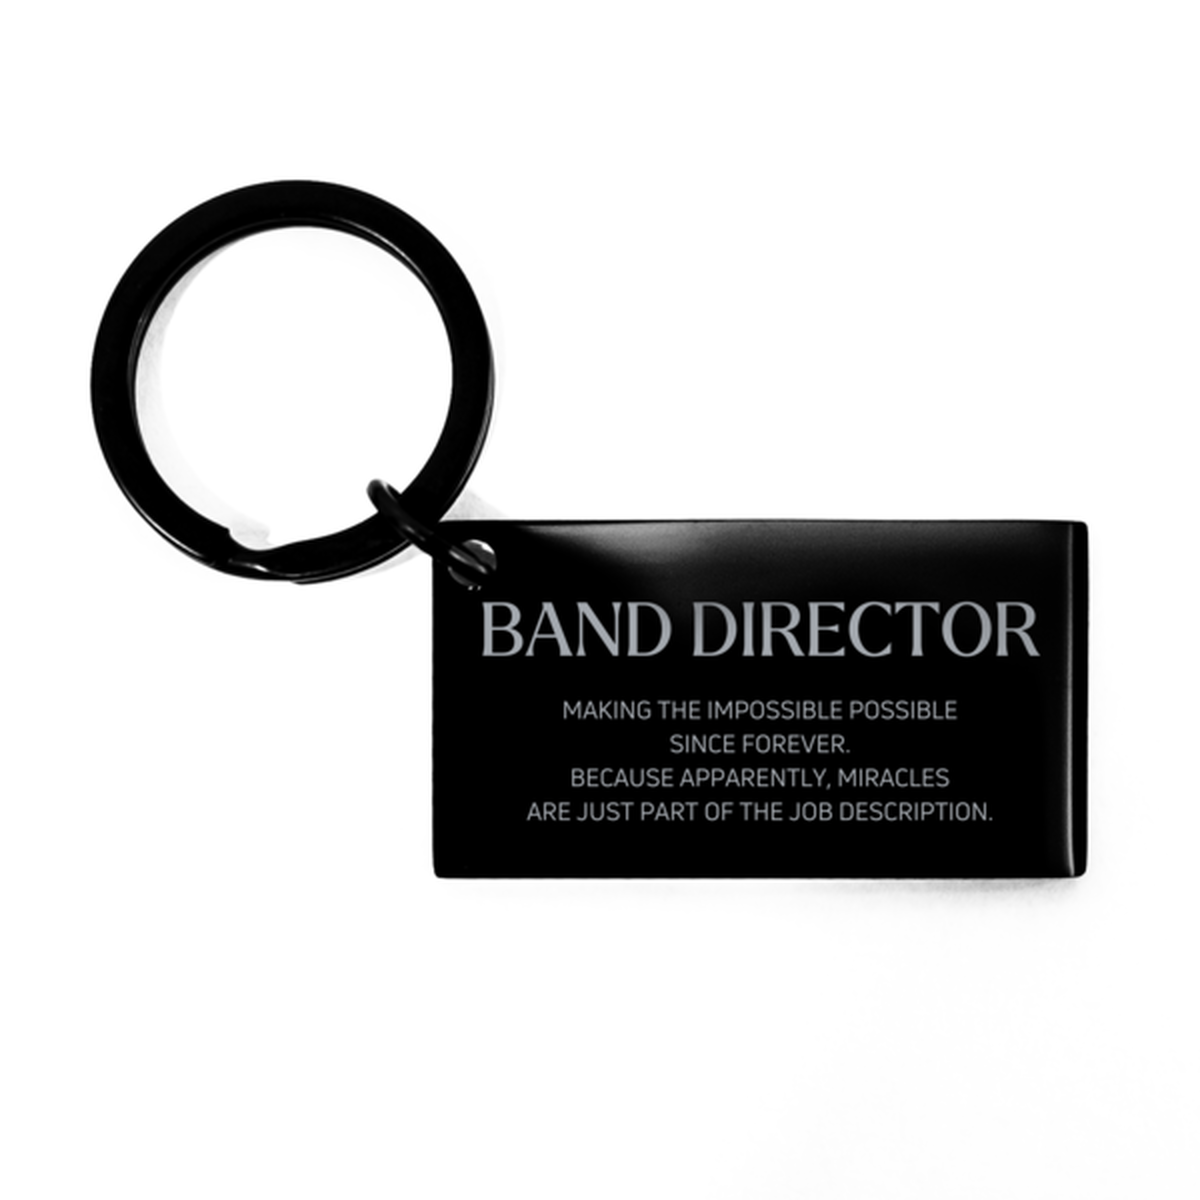 Funny Band Director Gifts, Miracles are just part of the job description, Inspirational Birthday Keychain For Band Director, Men, Women, Coworkers, Friends, Boss